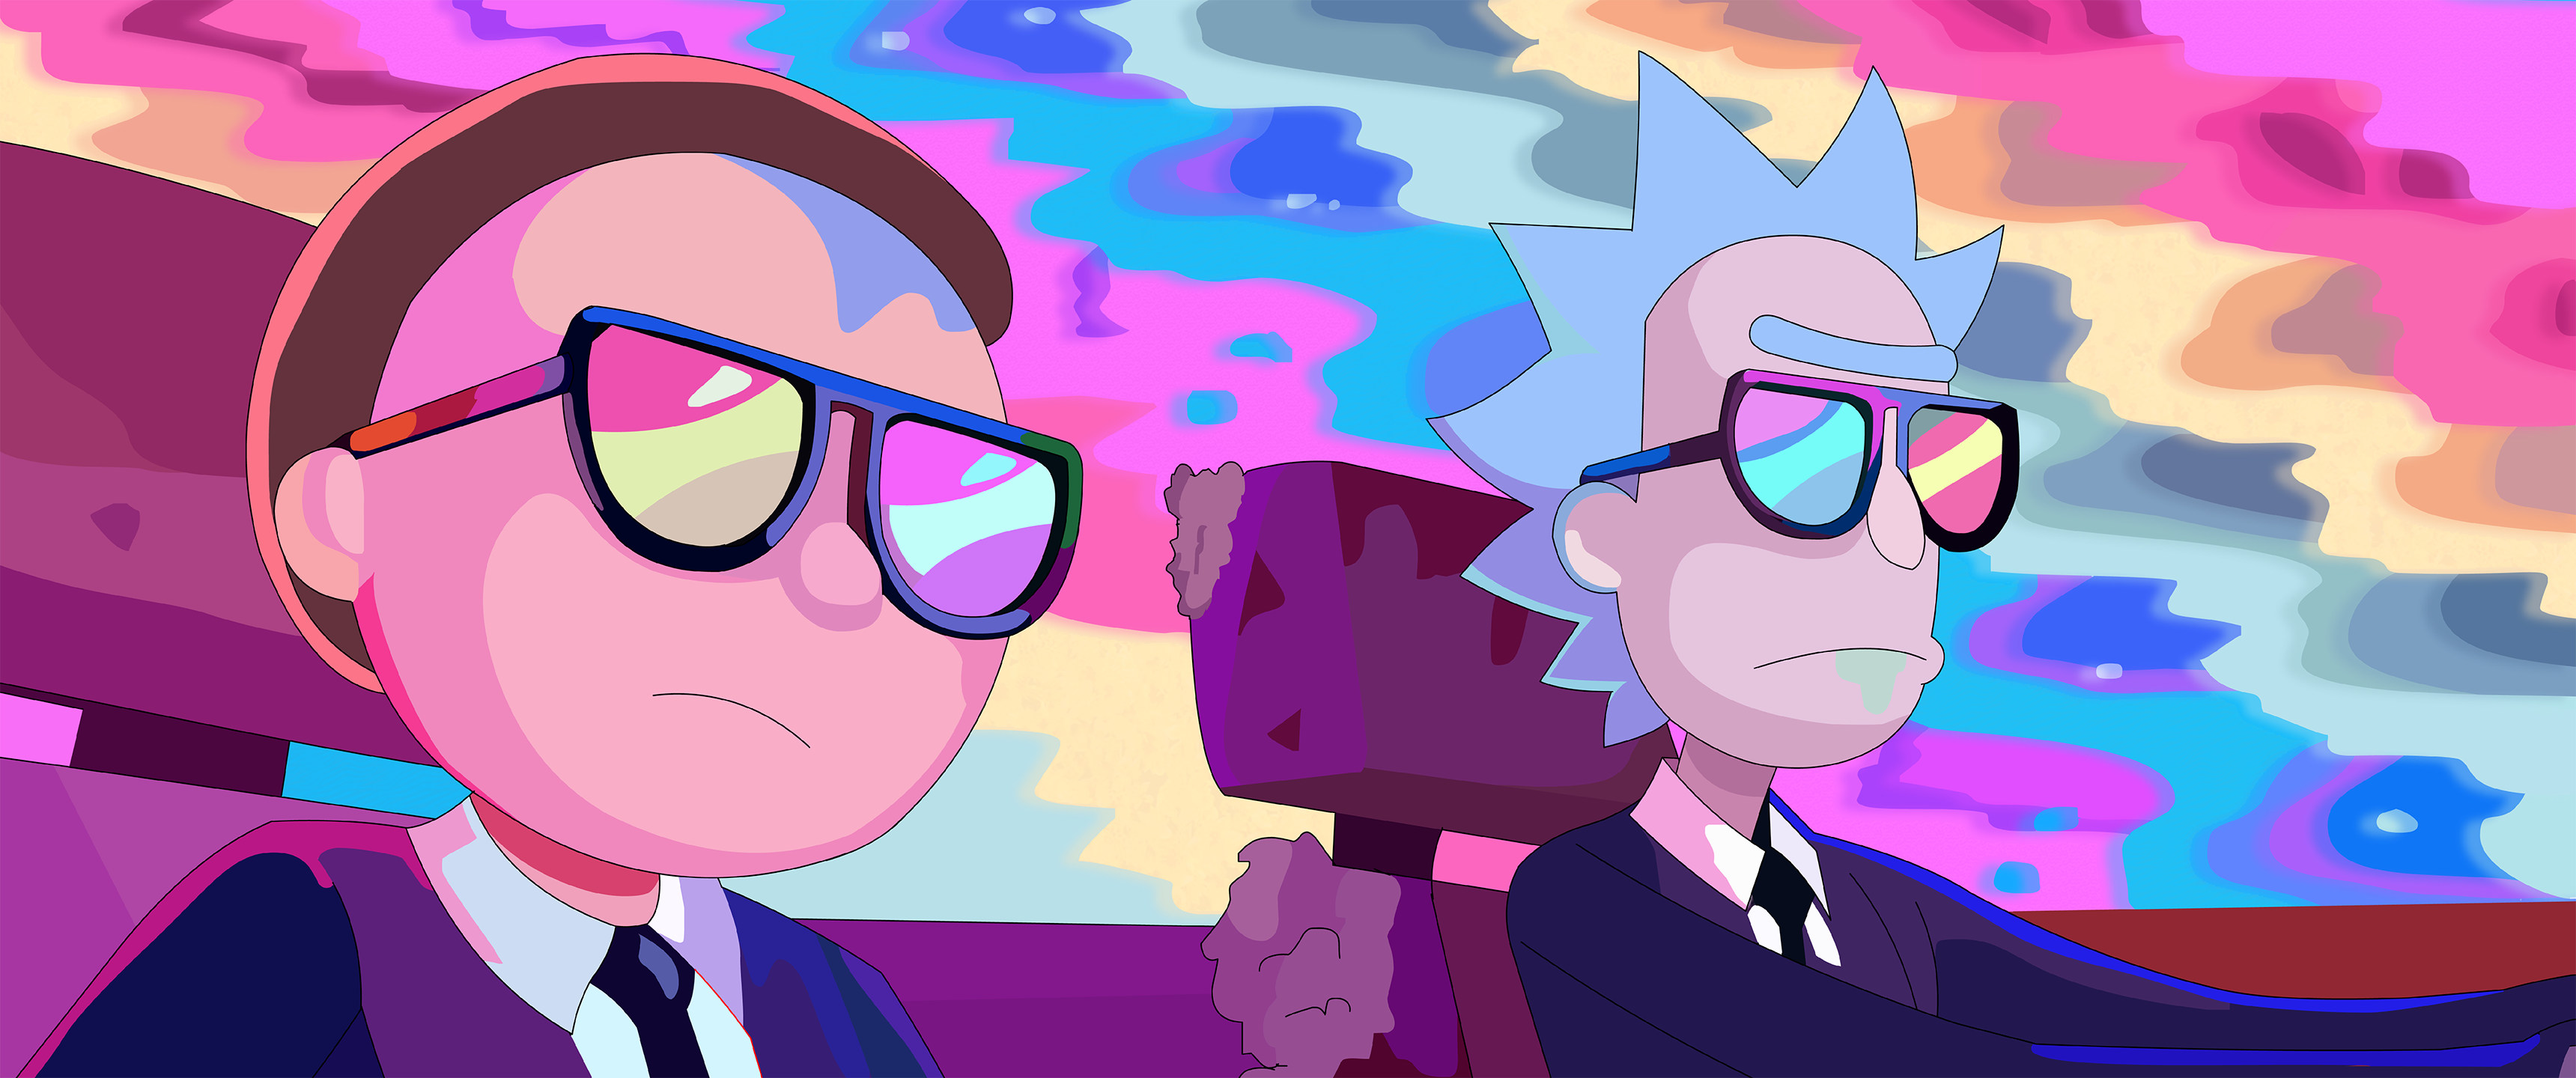 Rick And Morty Run The Jewels Vector Graphics 3440x1440